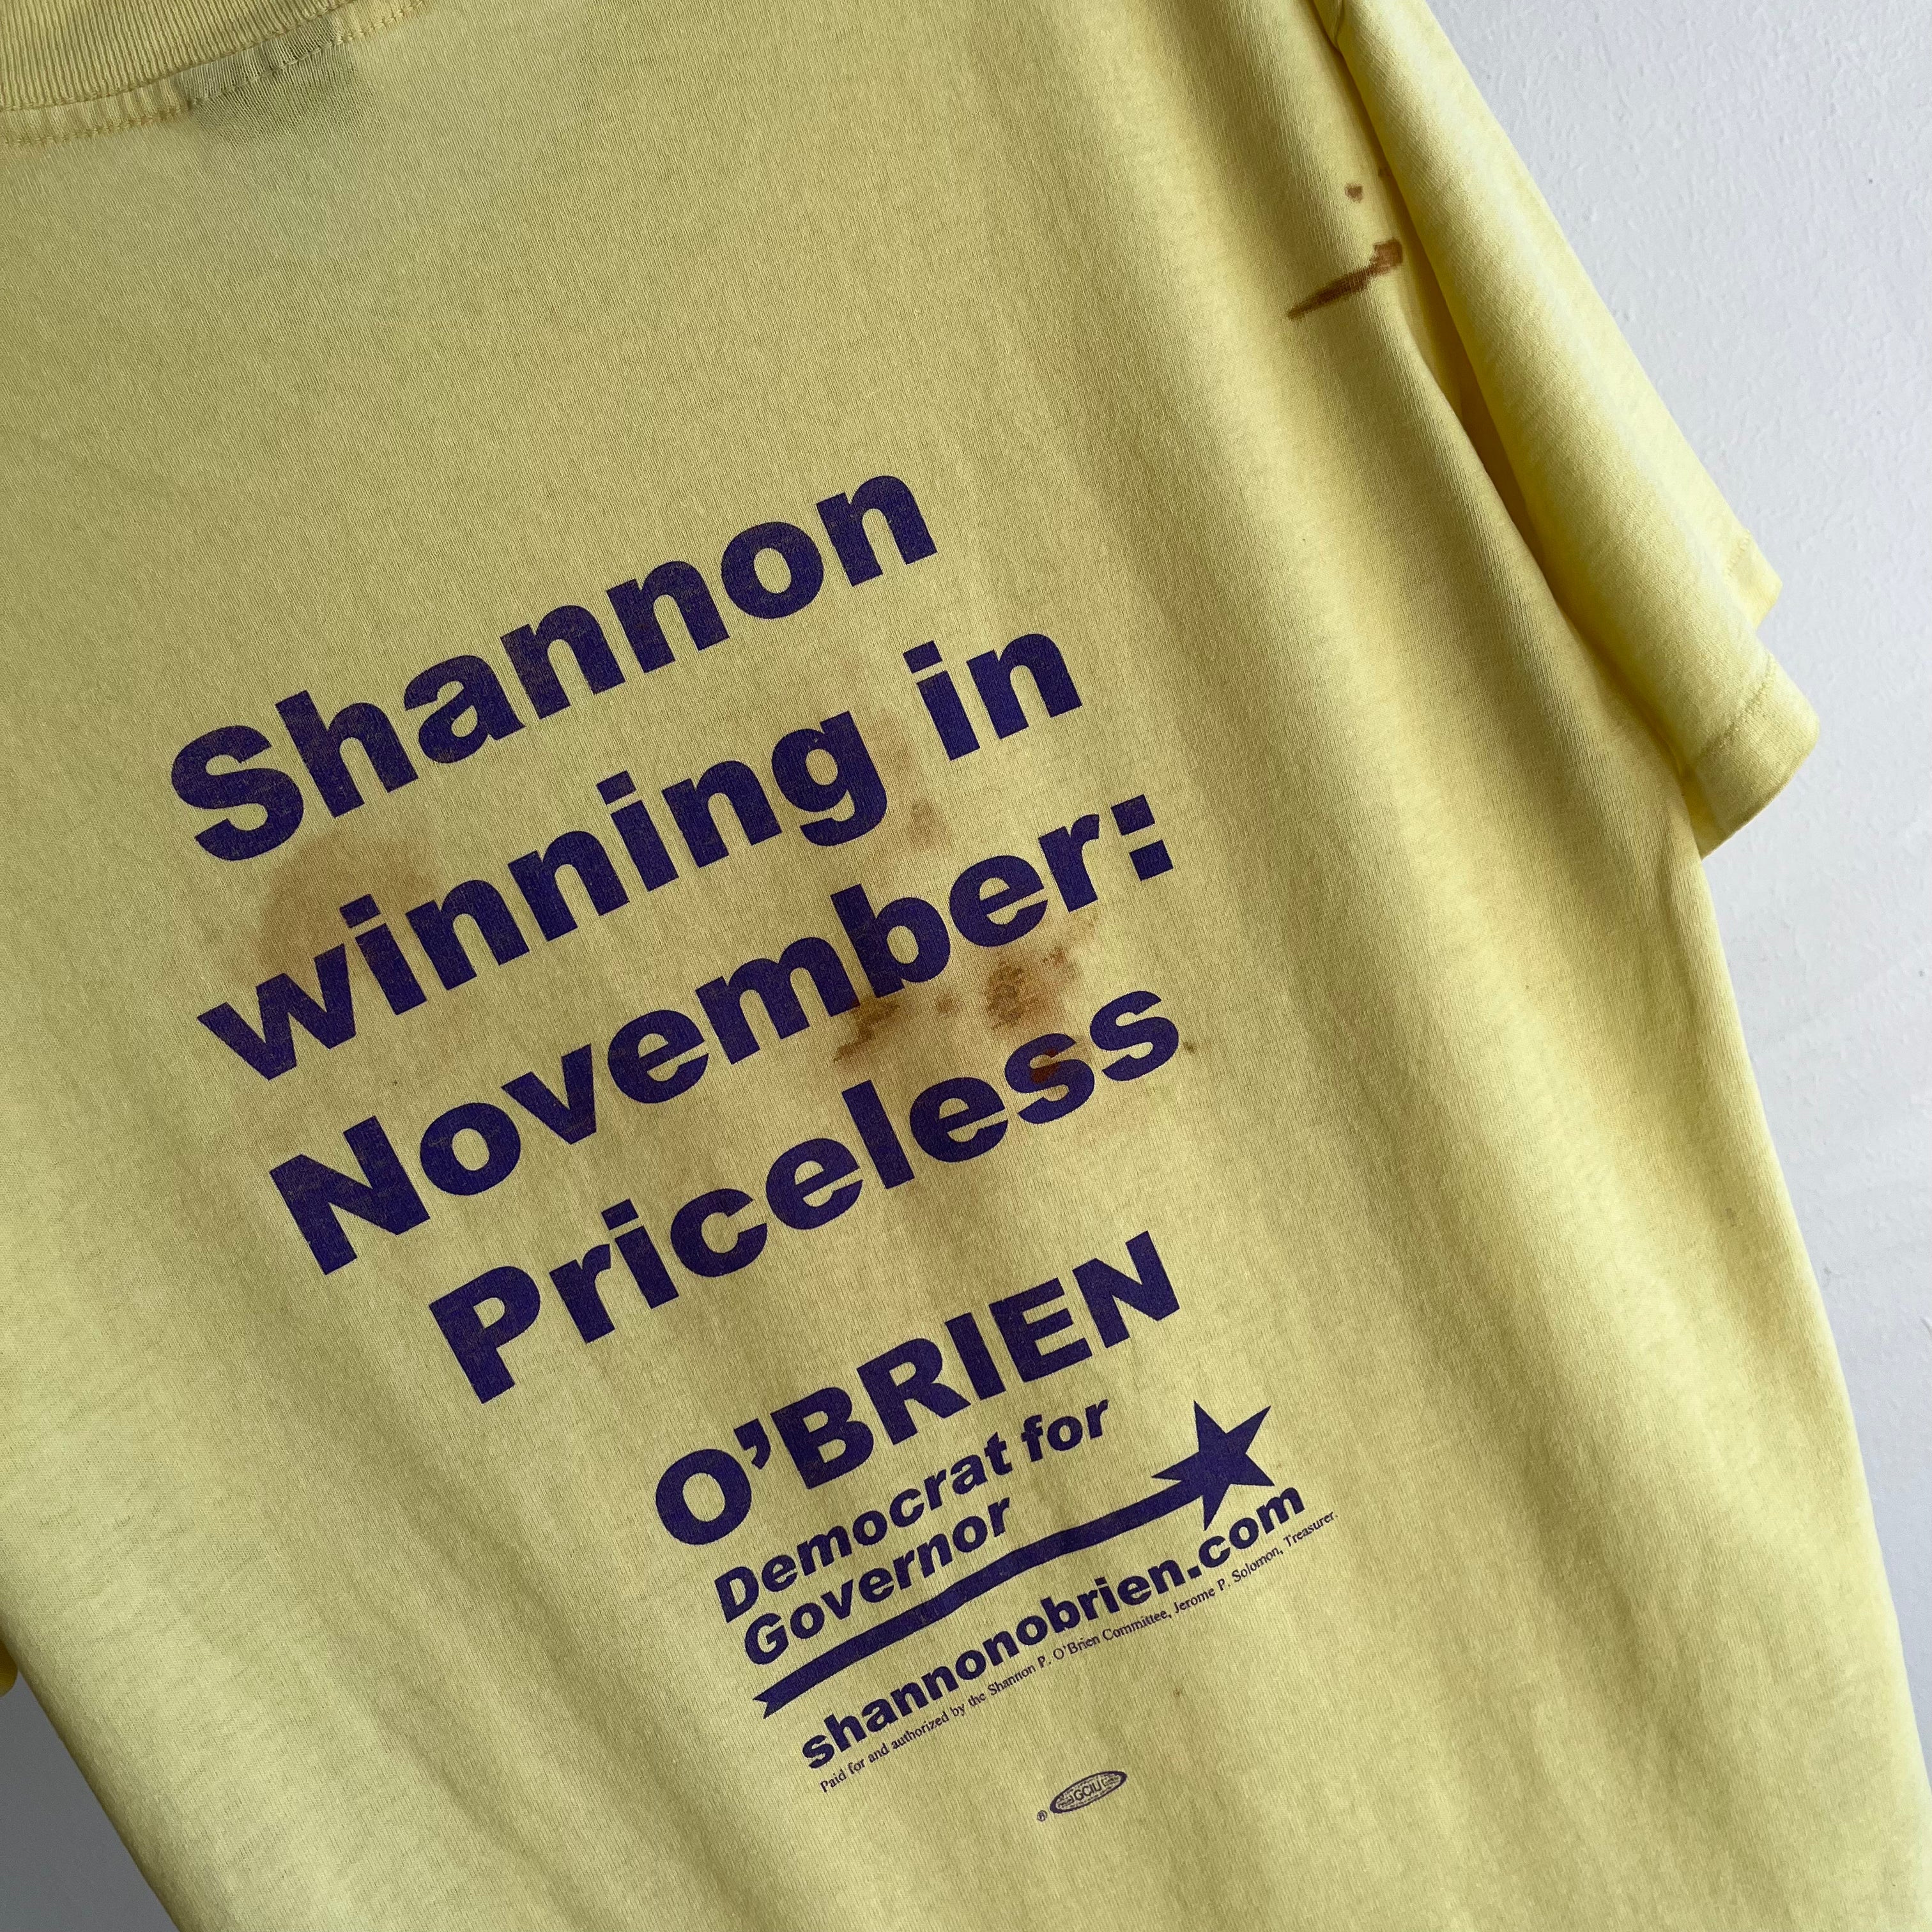 1999 Political T-Shirt with Gnarly Staining